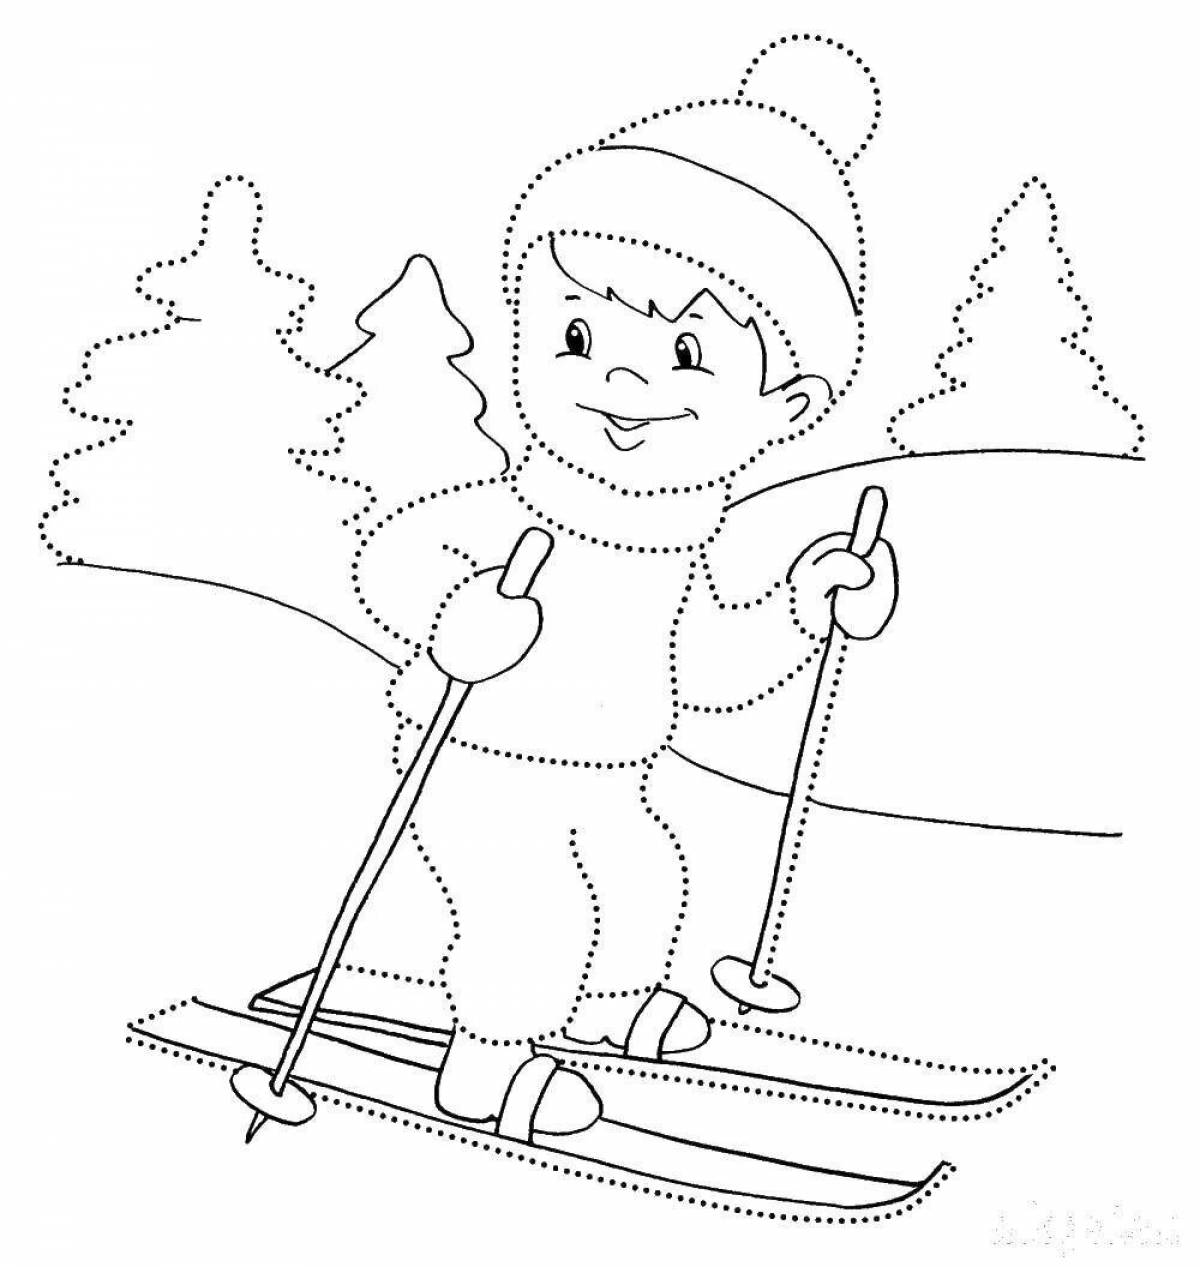 Coloring book of an attractive boy skiing